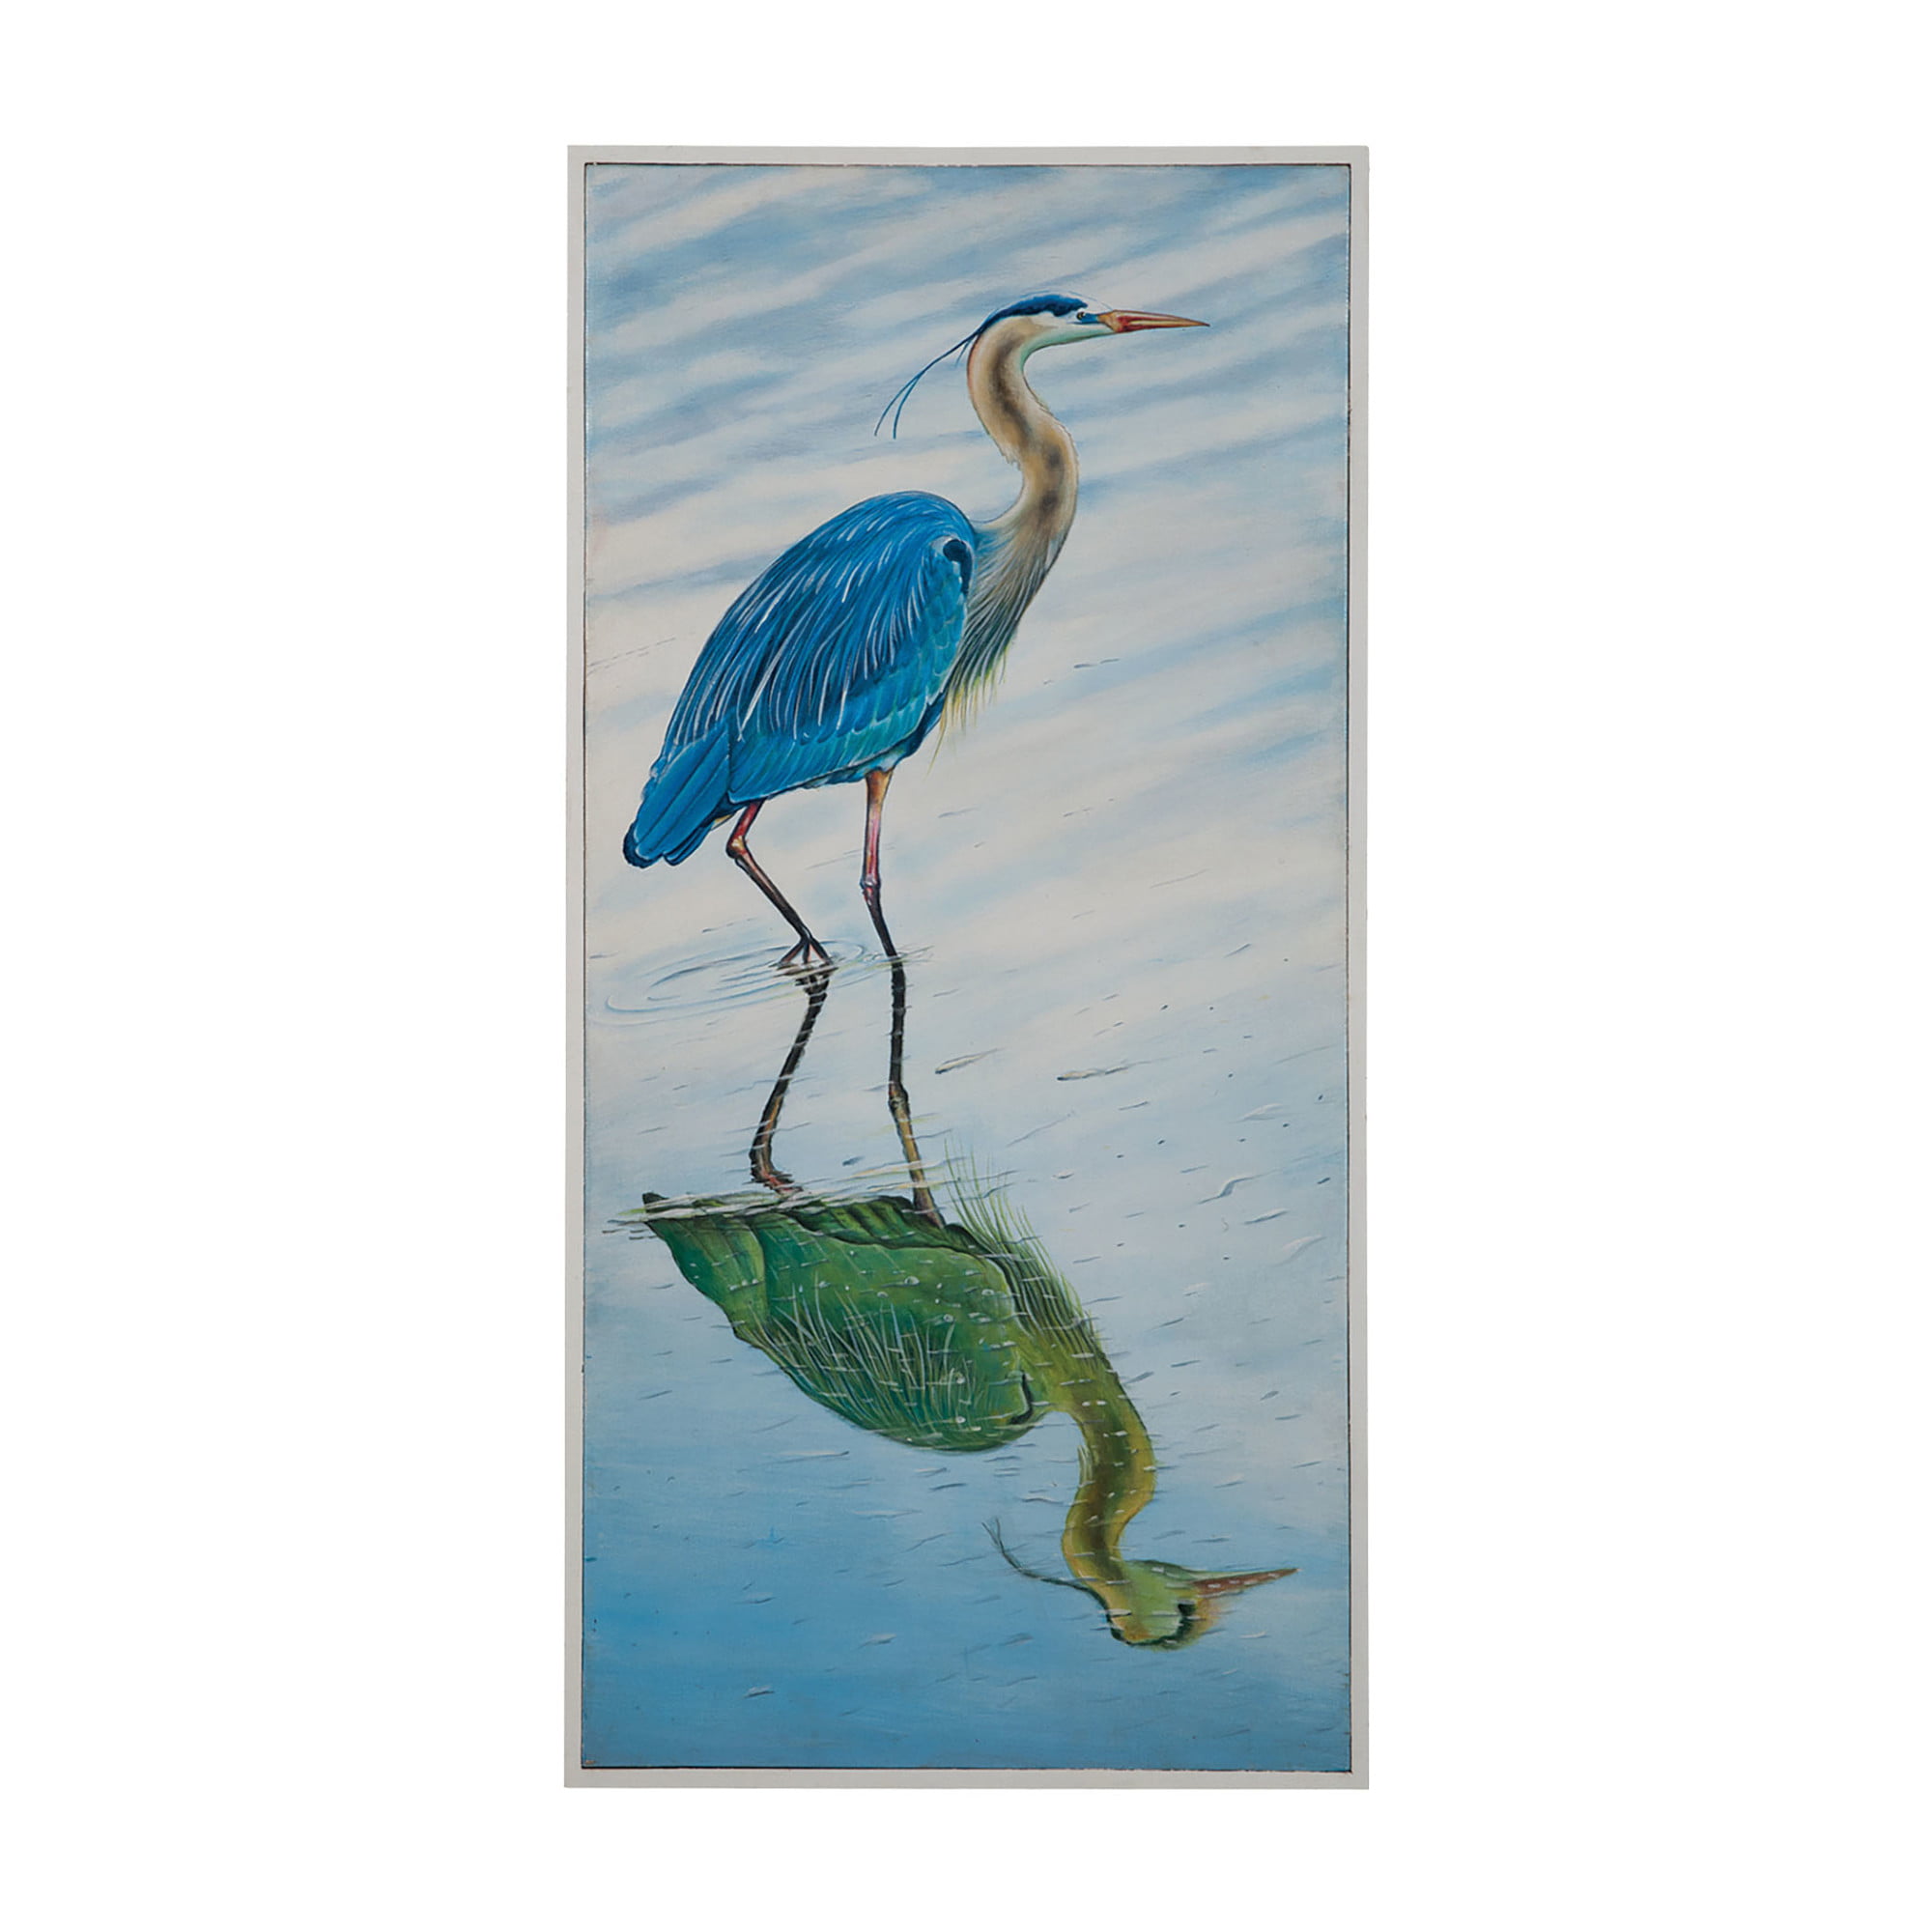 Guildmaster 162510 50" By 24" Framed Hand Painted Blue Heron Wall Art On Canvas